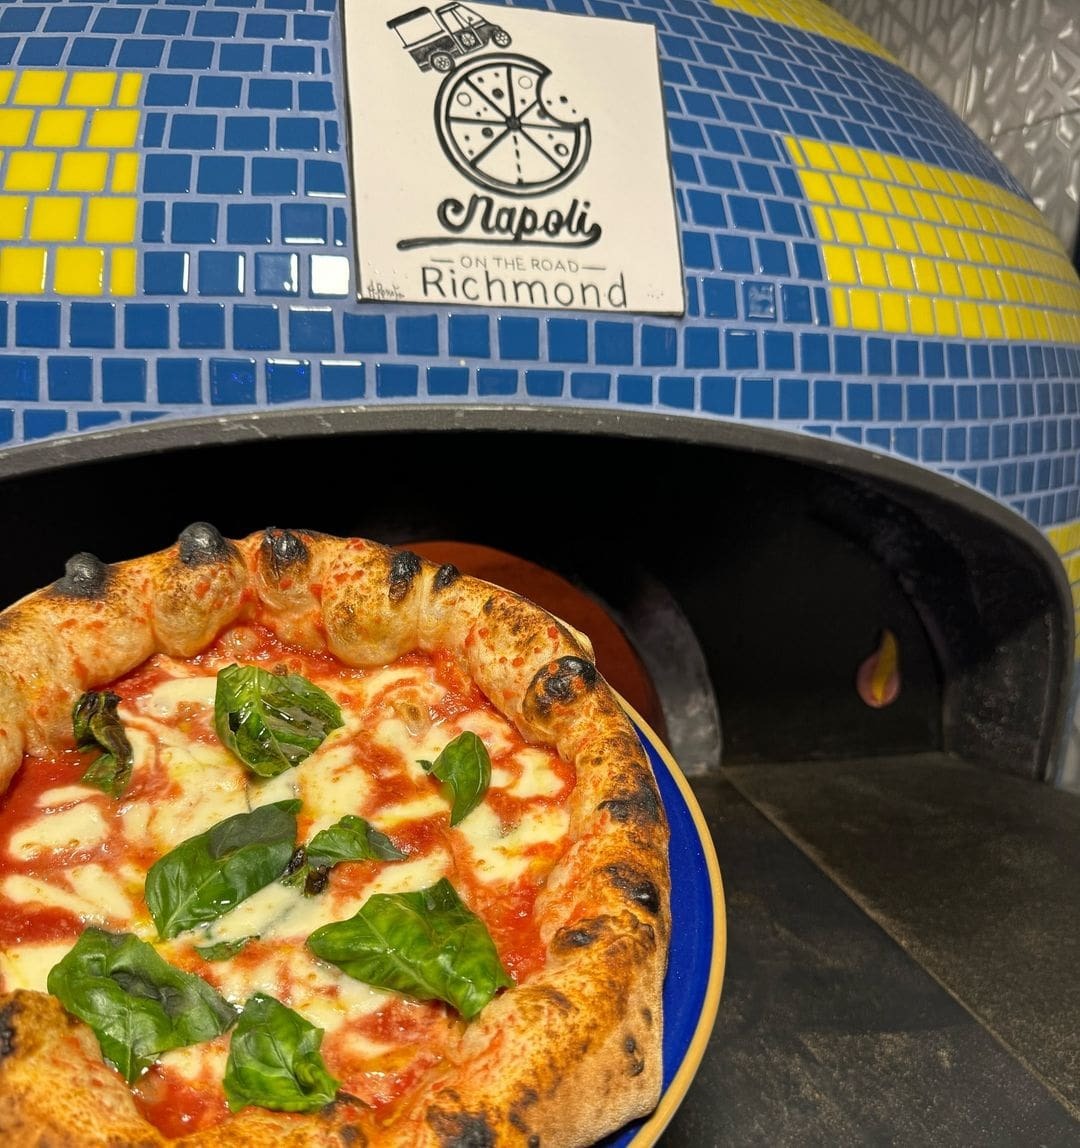 <p>Winner of the 2023 Pizza Maker of the Year award, <a href="https://www.napoliontheroad.co.uk" title="https://www.napoliontheroad.co.uk">Napoli on the Road</a> takes the top spot for London. Created by Michele Pascarella, the renowned pizzeria started out as a series of pop-ups around the city. The eatery now has two permanent locations, one in Richmond and one in Cheswick. You can expect seasonal ingredients and traditional Neapolitan pizza bases.</p>